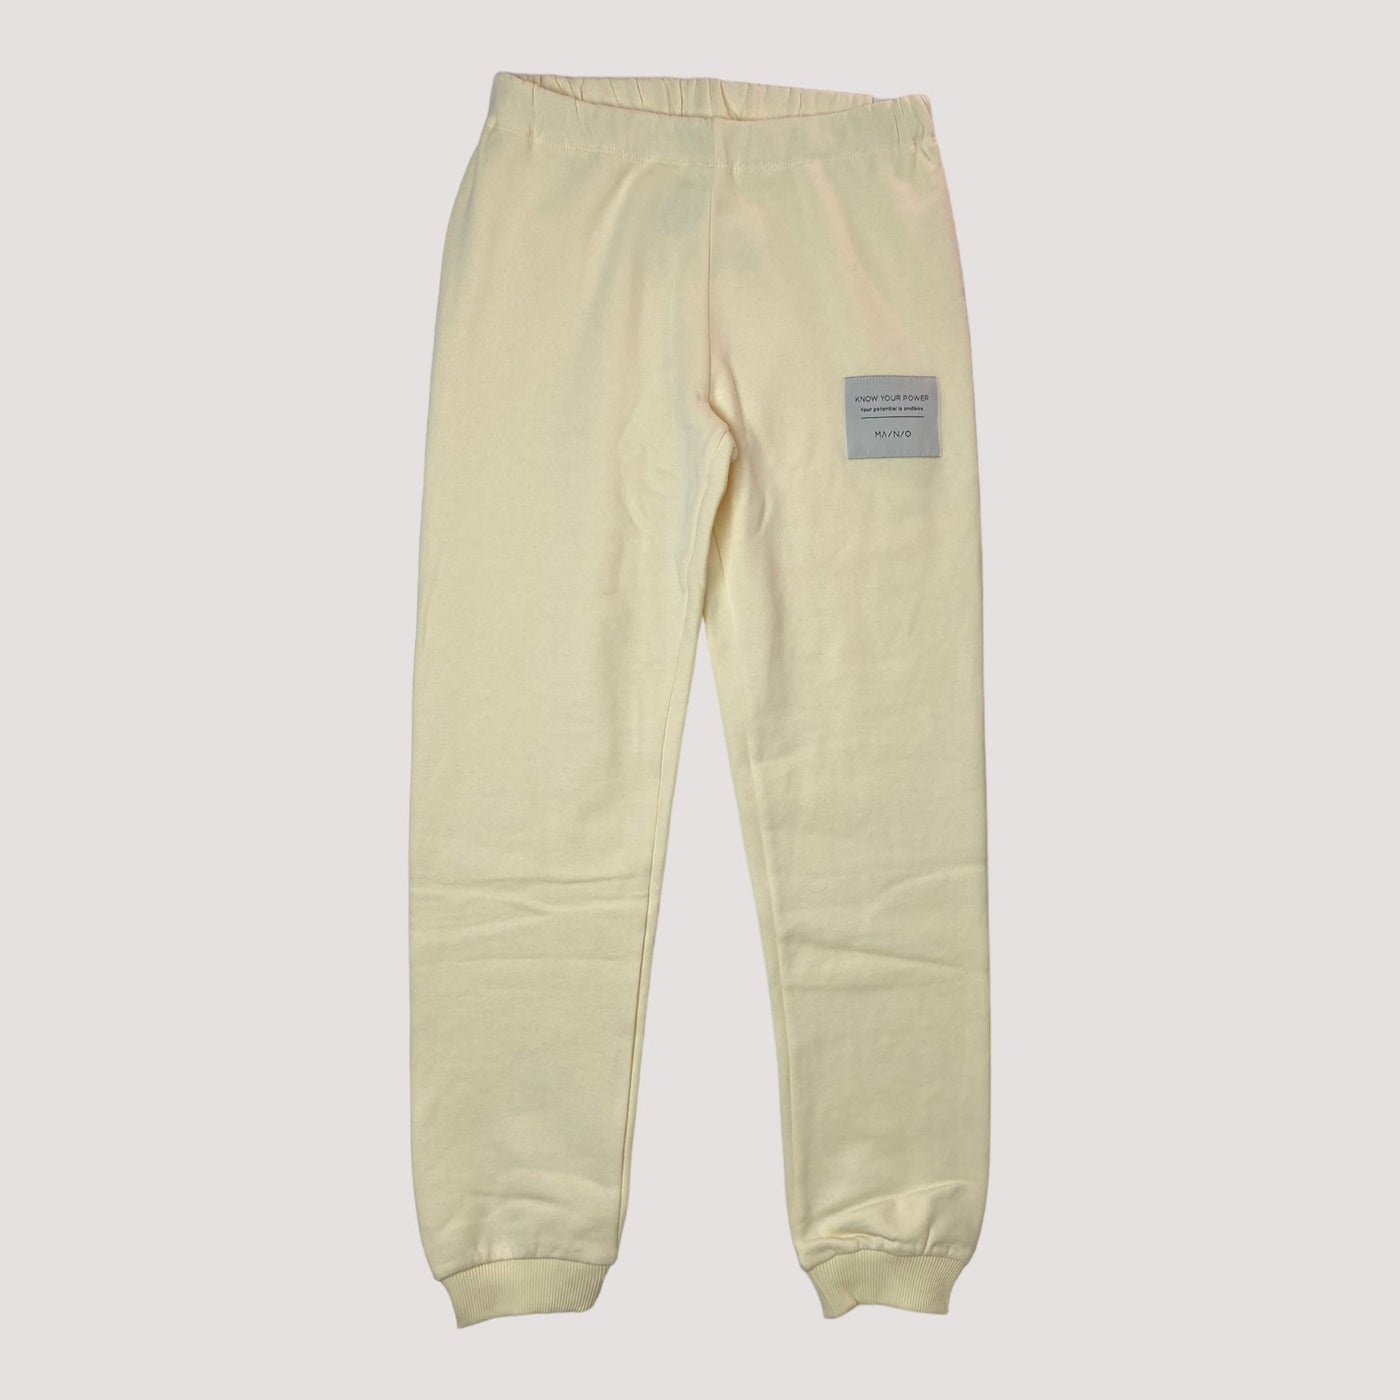 superpower sweatpants, pale yellow | 146/152cm